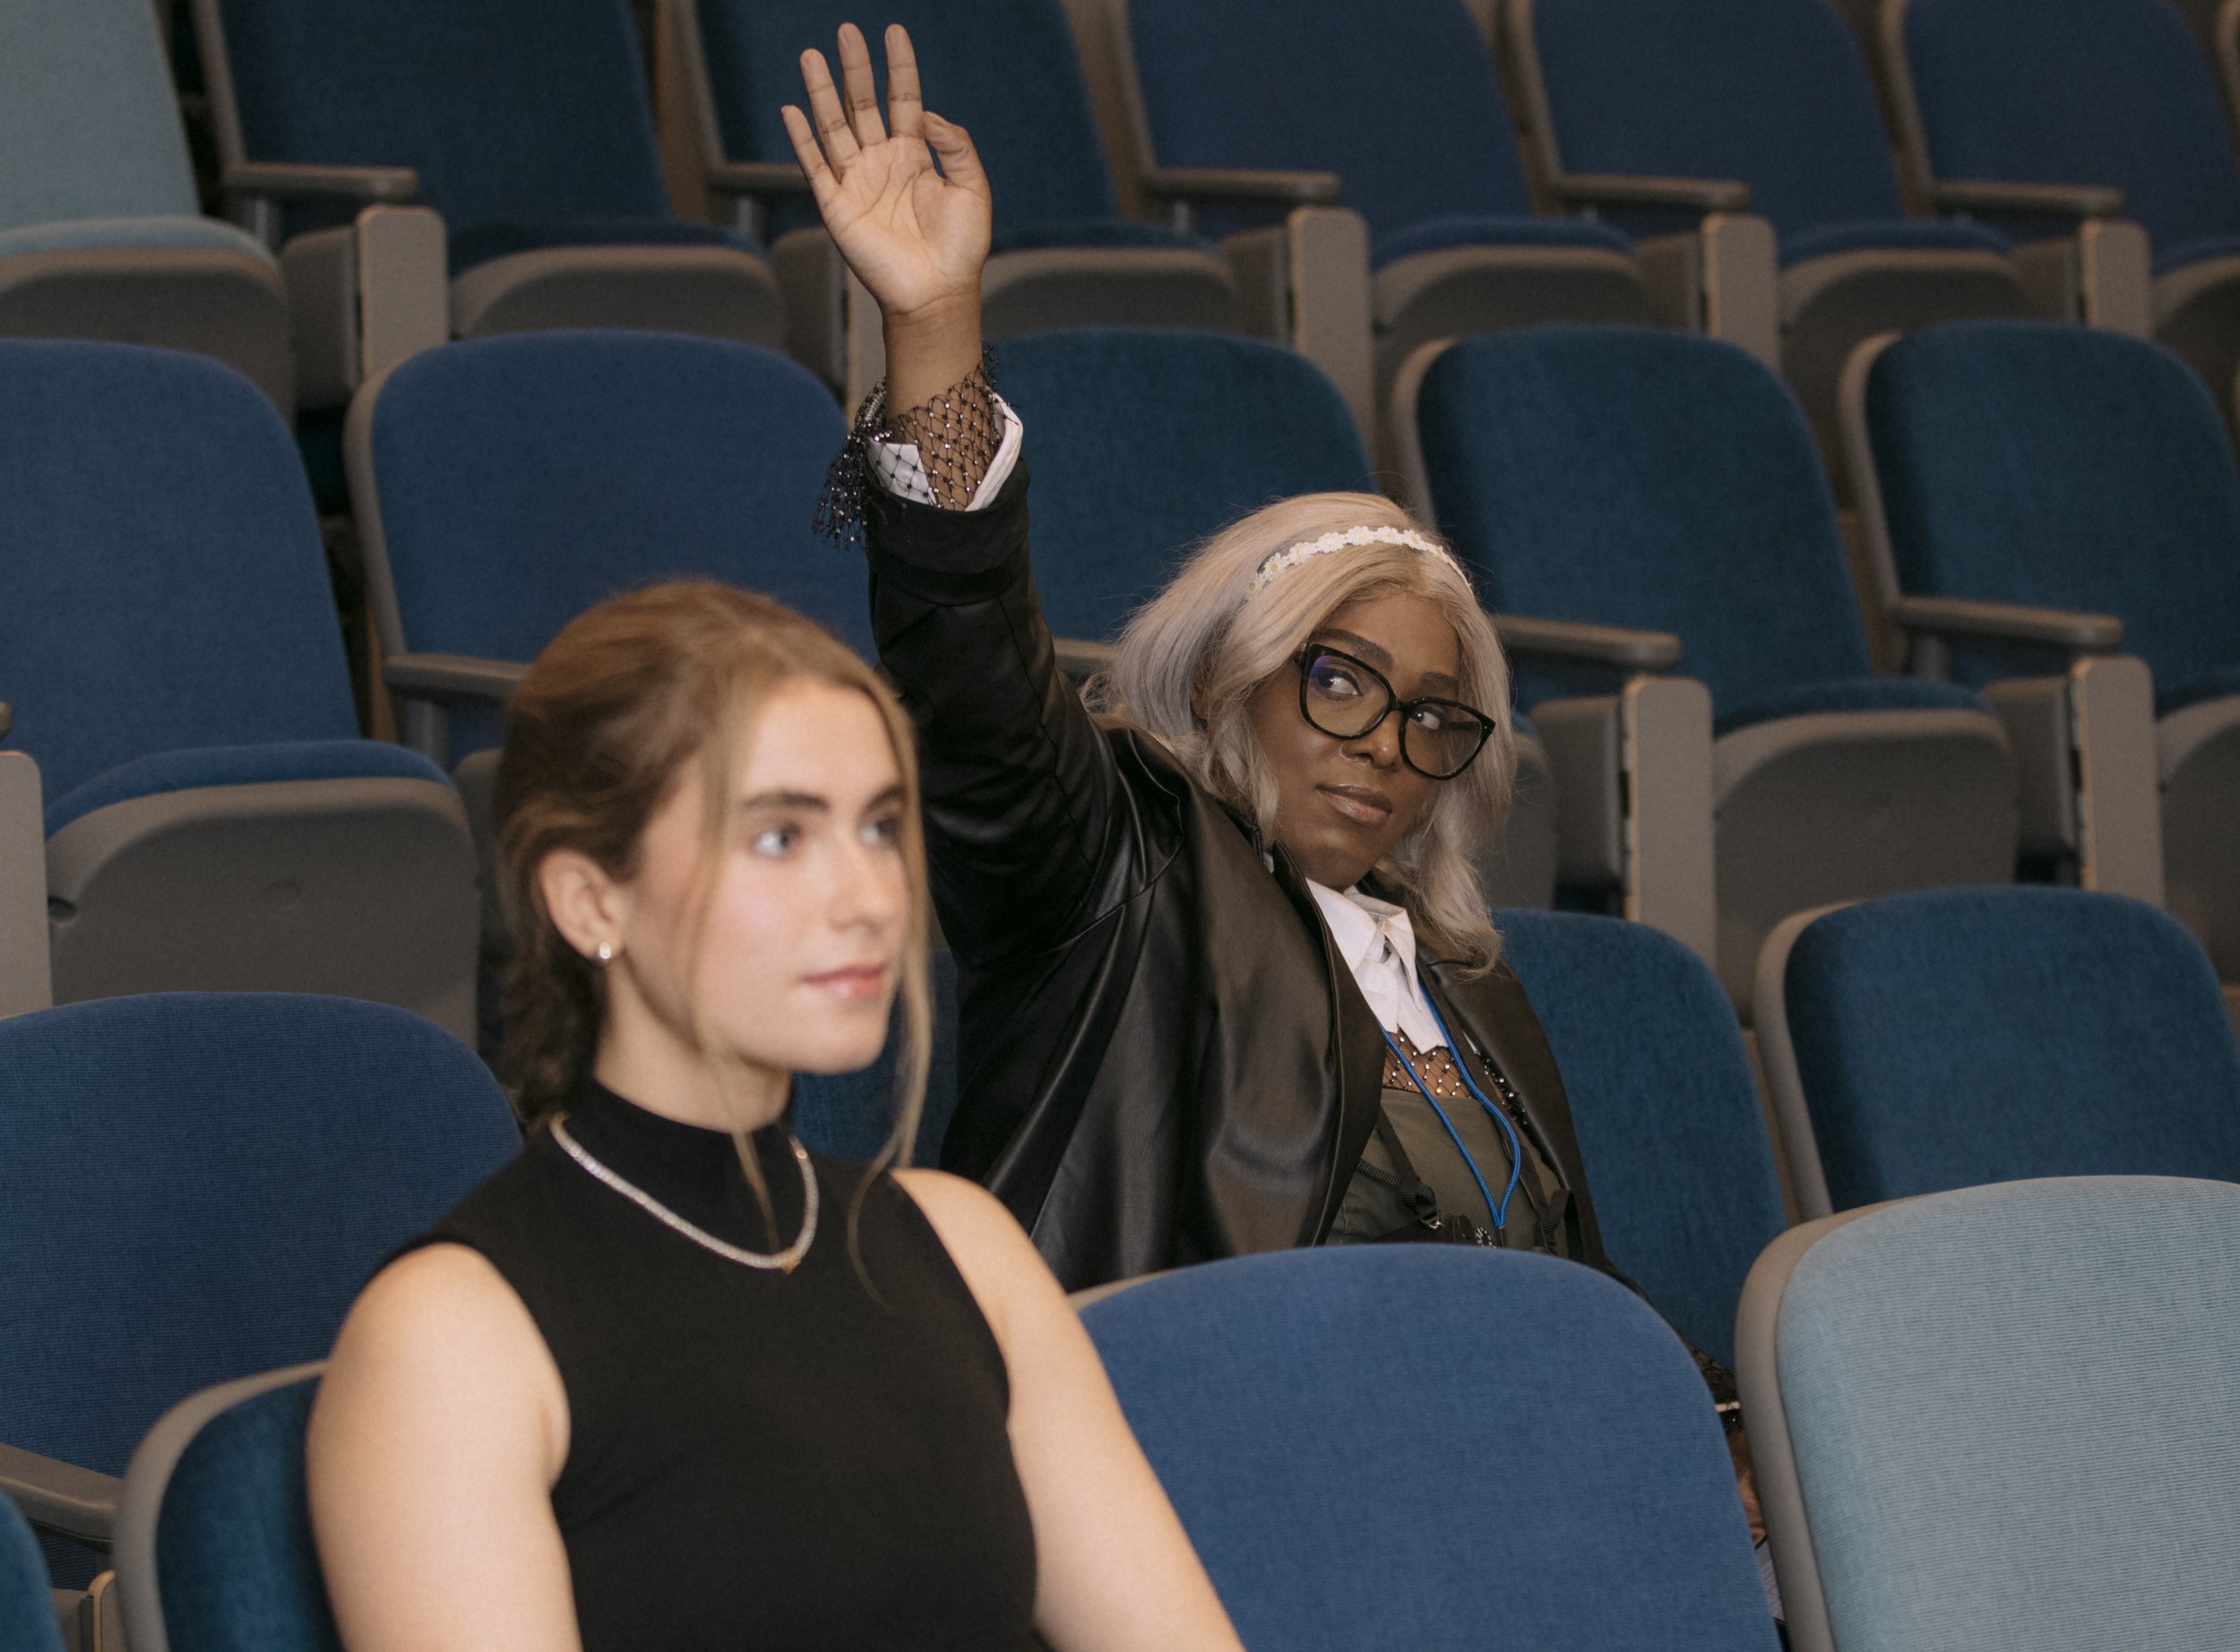  Brianna Johnson raises her hand to ask a question to a candidate at the Santa Monica College student government election event. Santa Monica, Calif., on March 30th, 2024.  (Corsair Photo: Luca Martinez) 